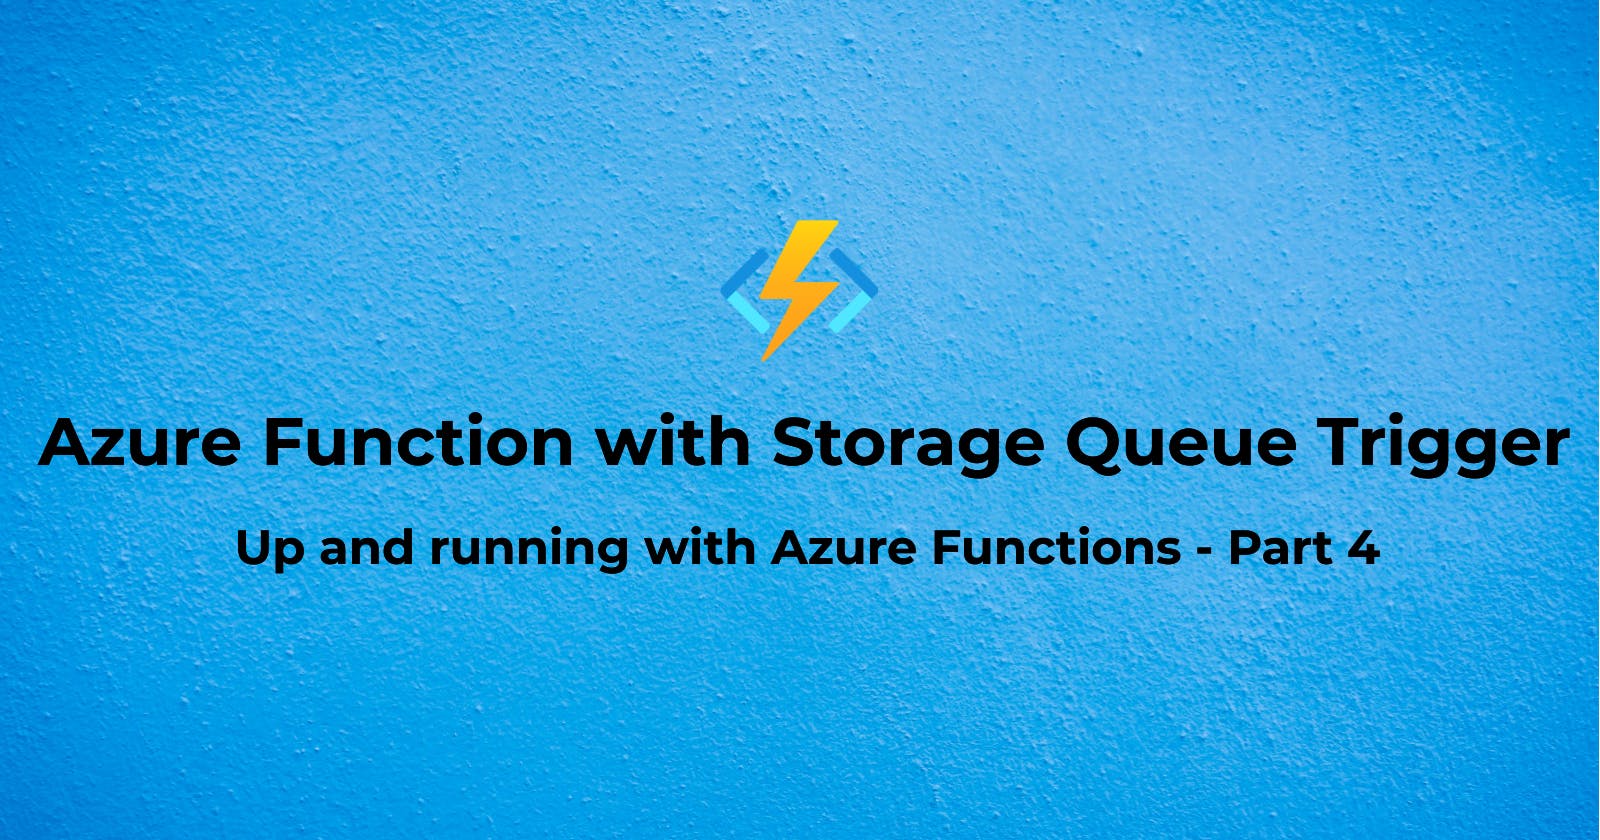 Azure Function with Storage Queue Trigger